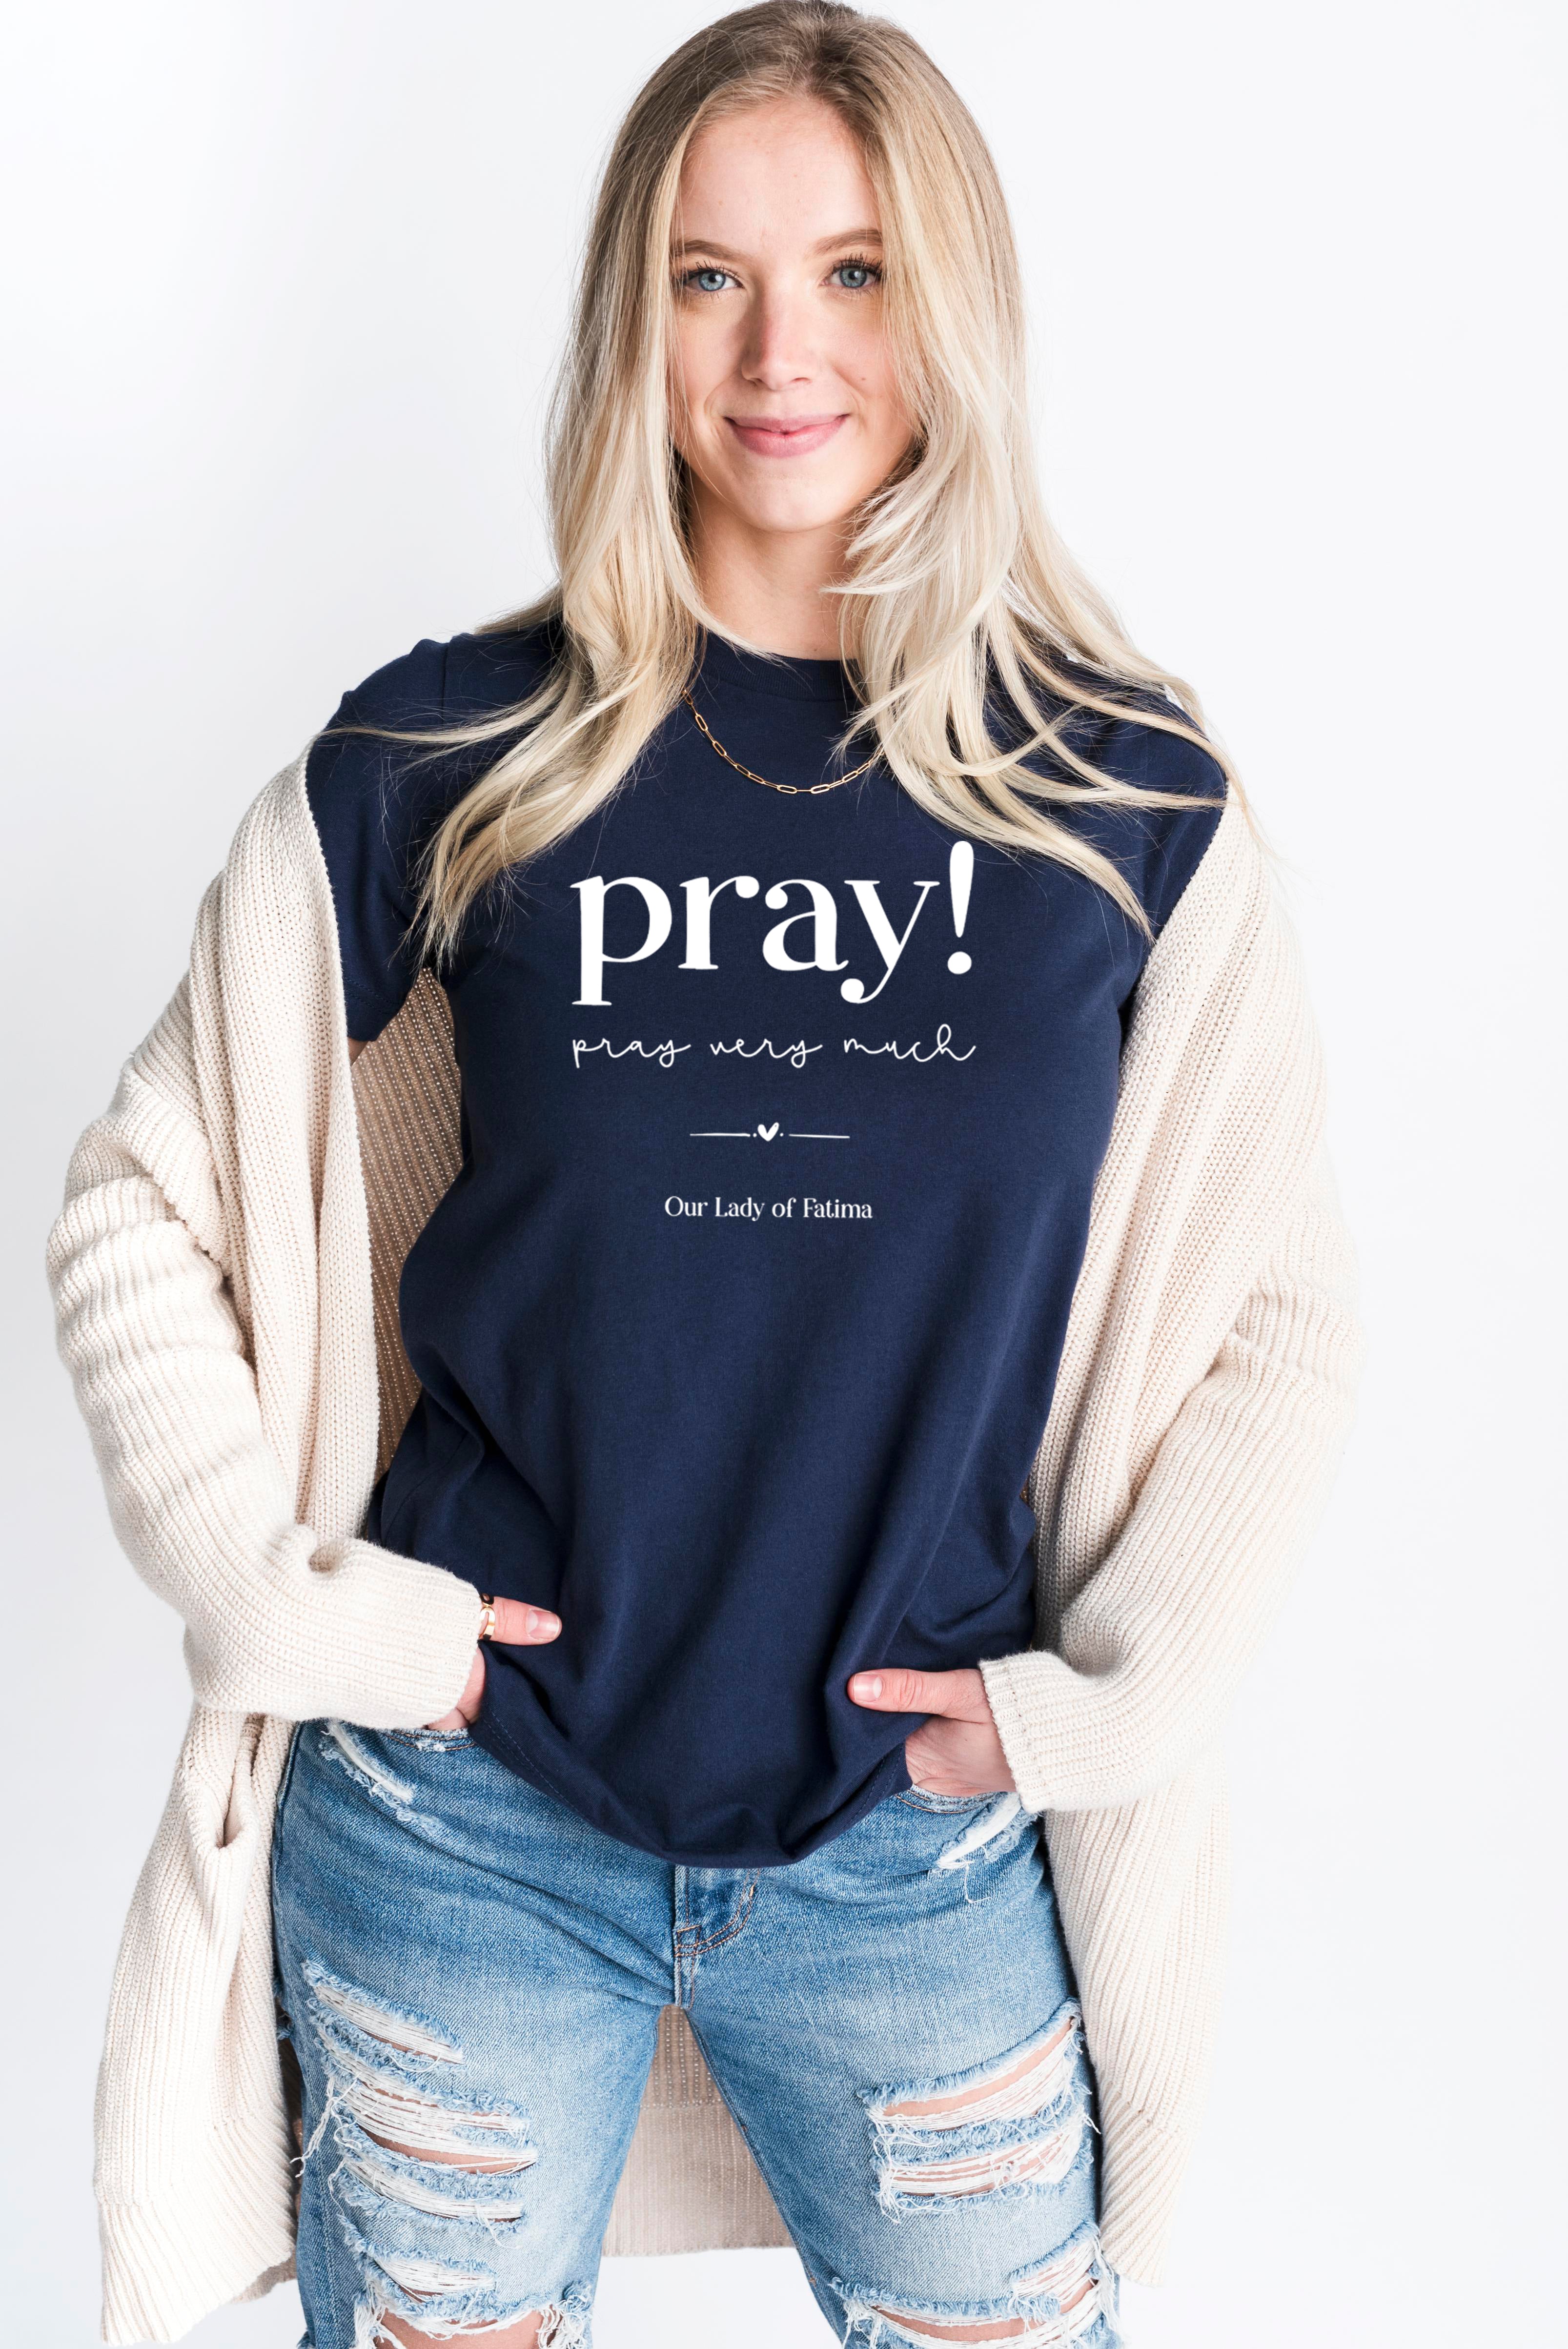 Our Lady of Fatima, Pray Very Much T-Shirt